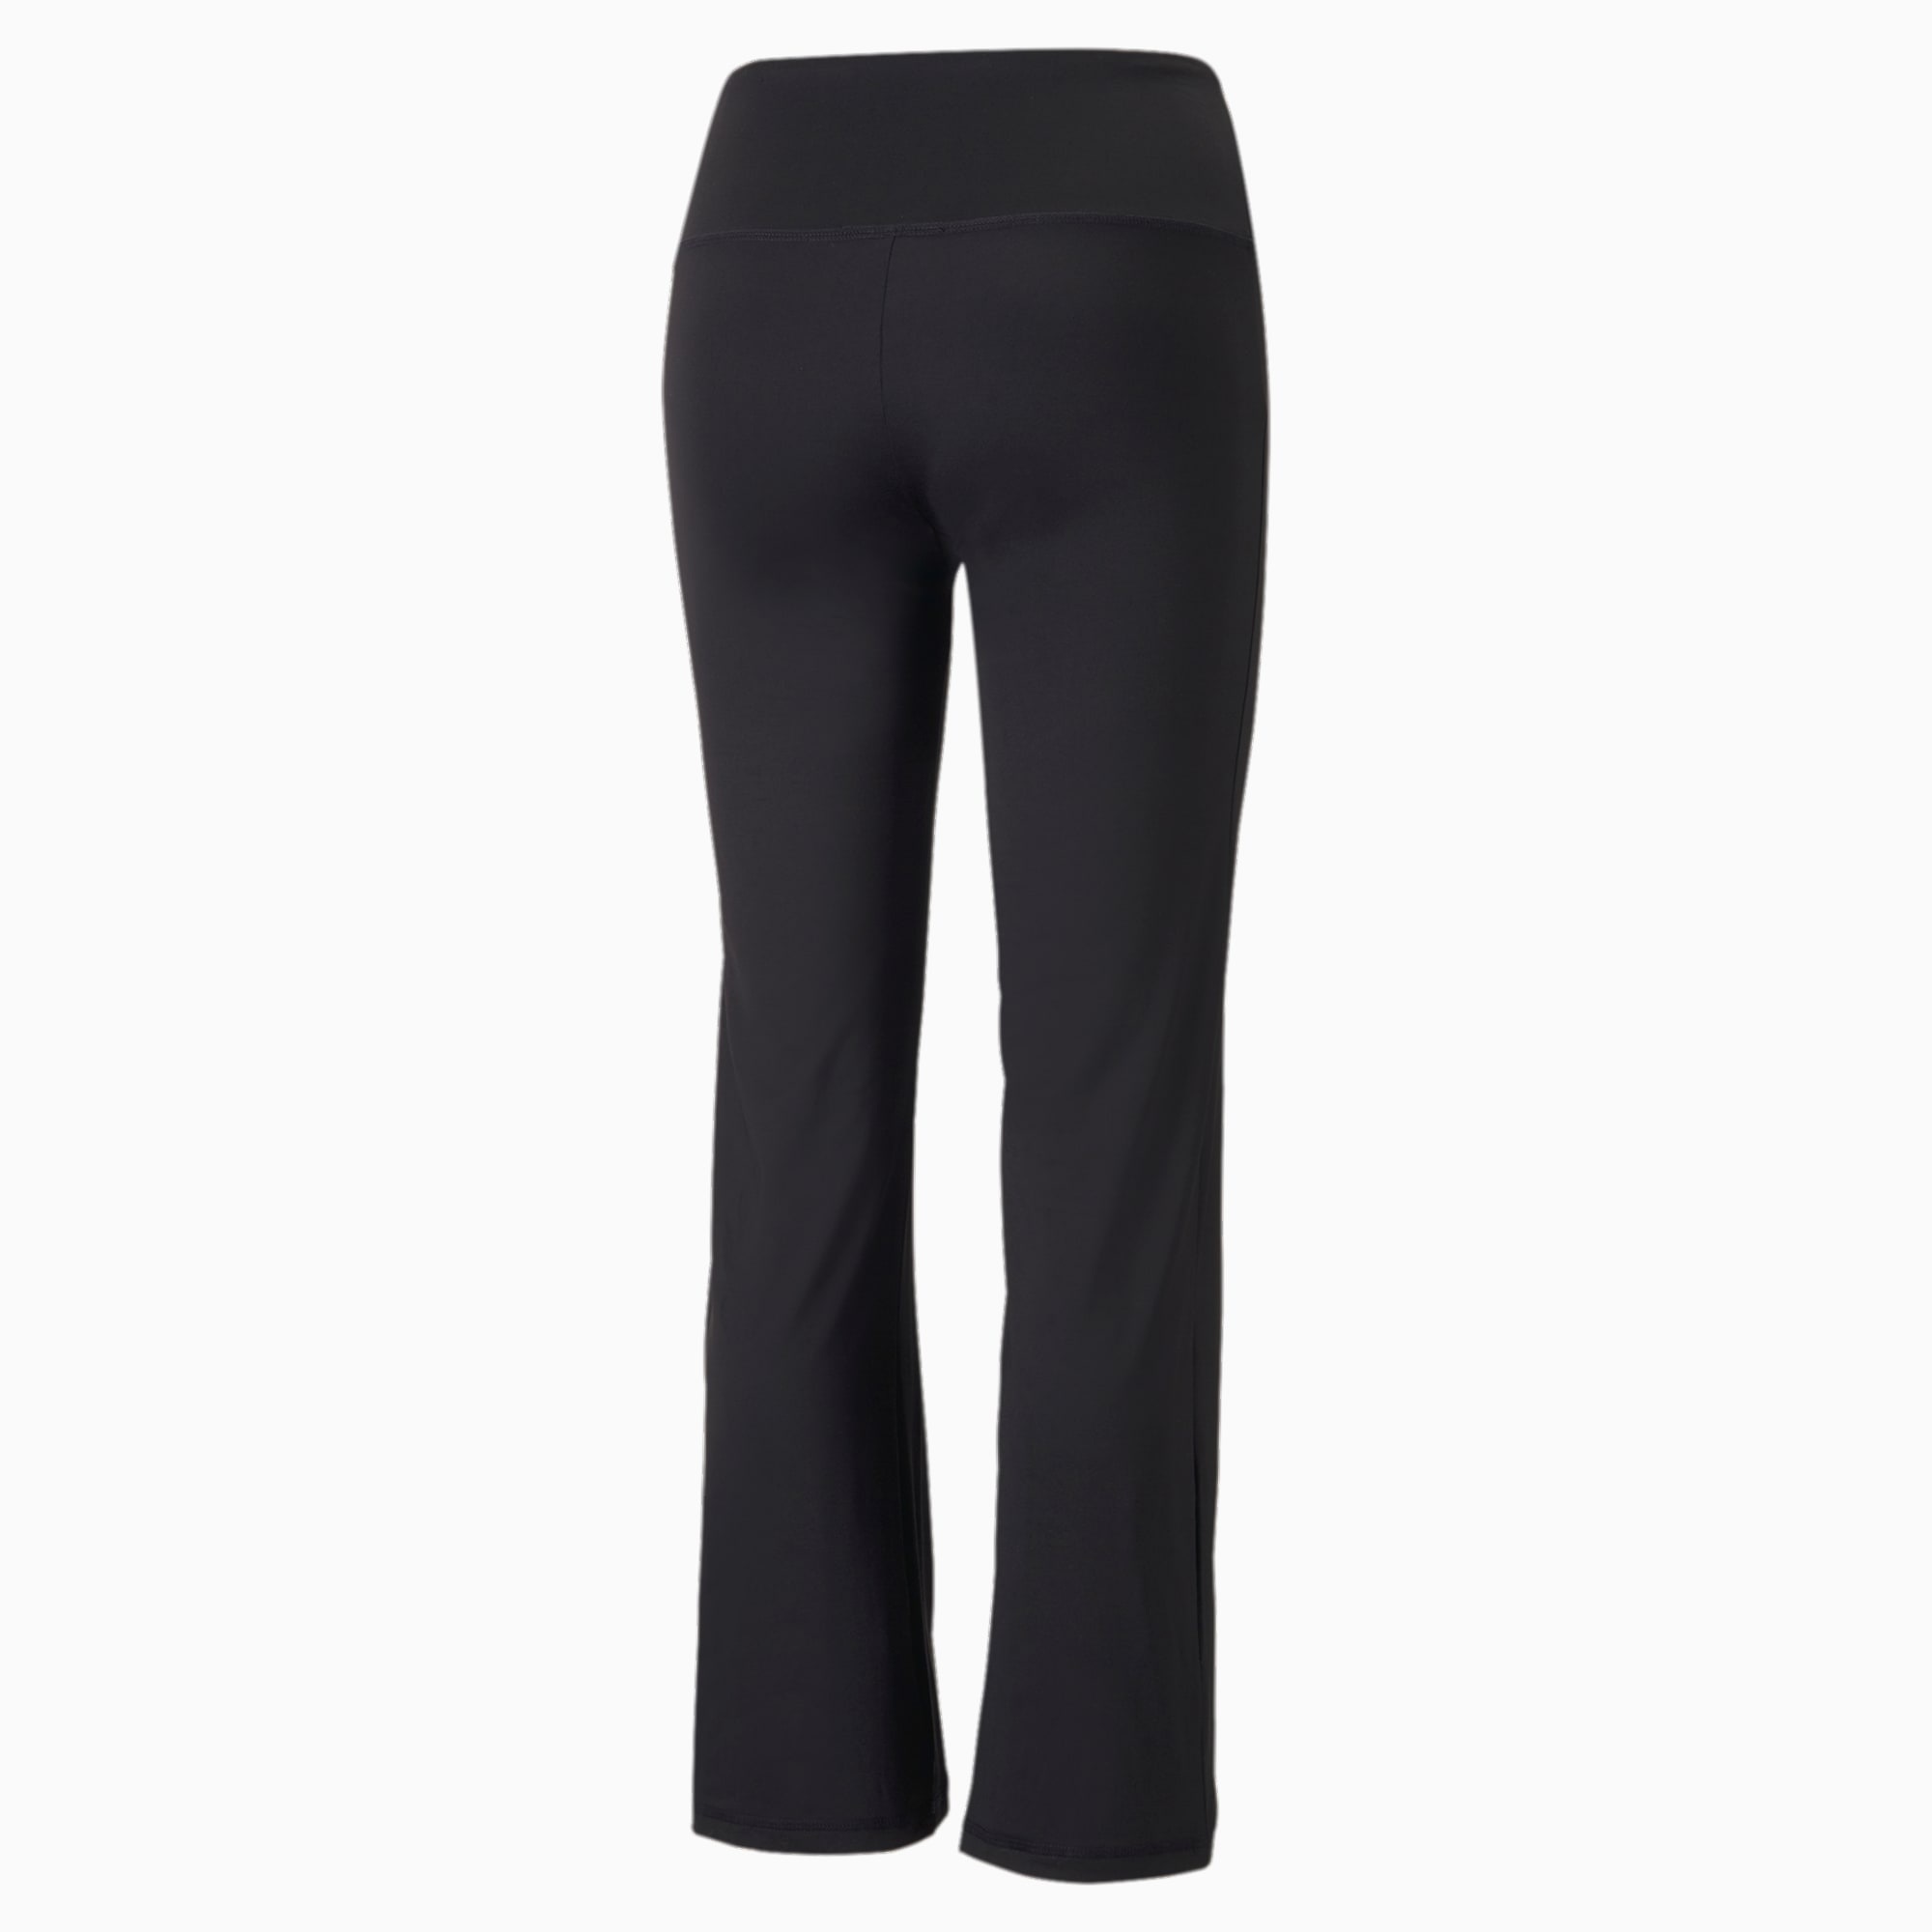 BCG Women's Flare Leg Pants Free Shipping At Academy, 50% OFF